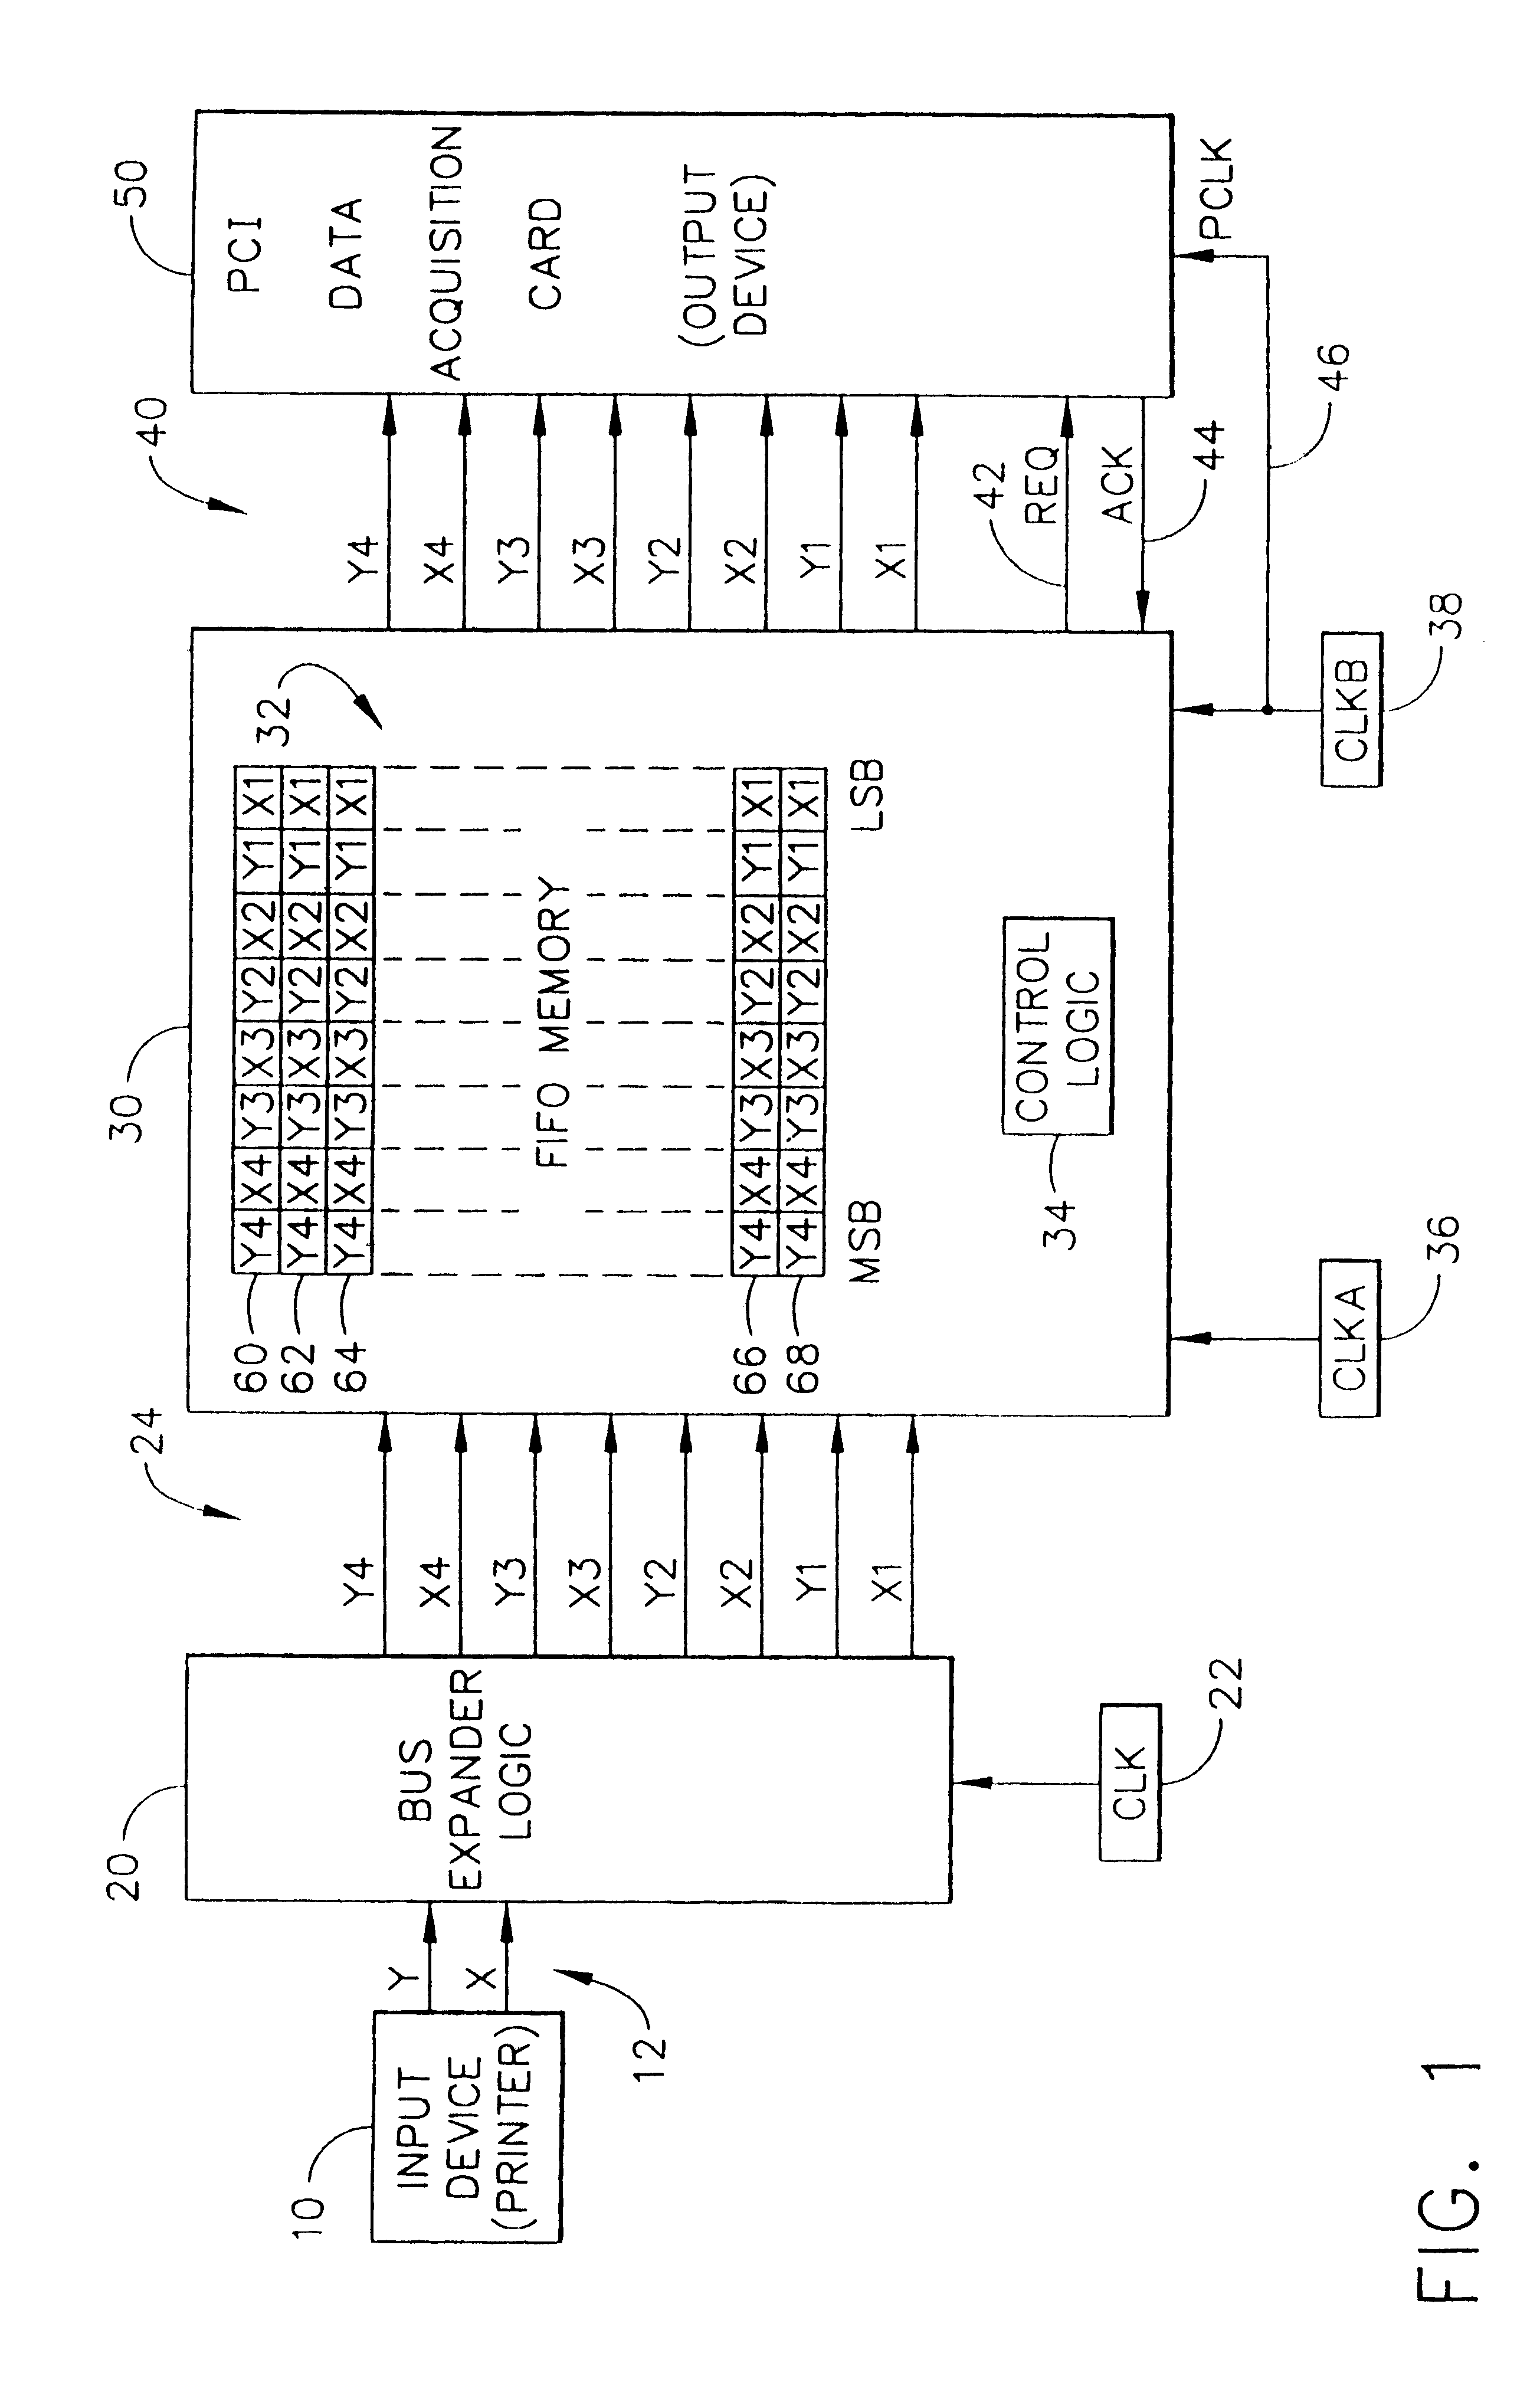 Method and apparatus for sampling digital data at a virtually constant rate, and transferring that data into a non-constant sampling rate device